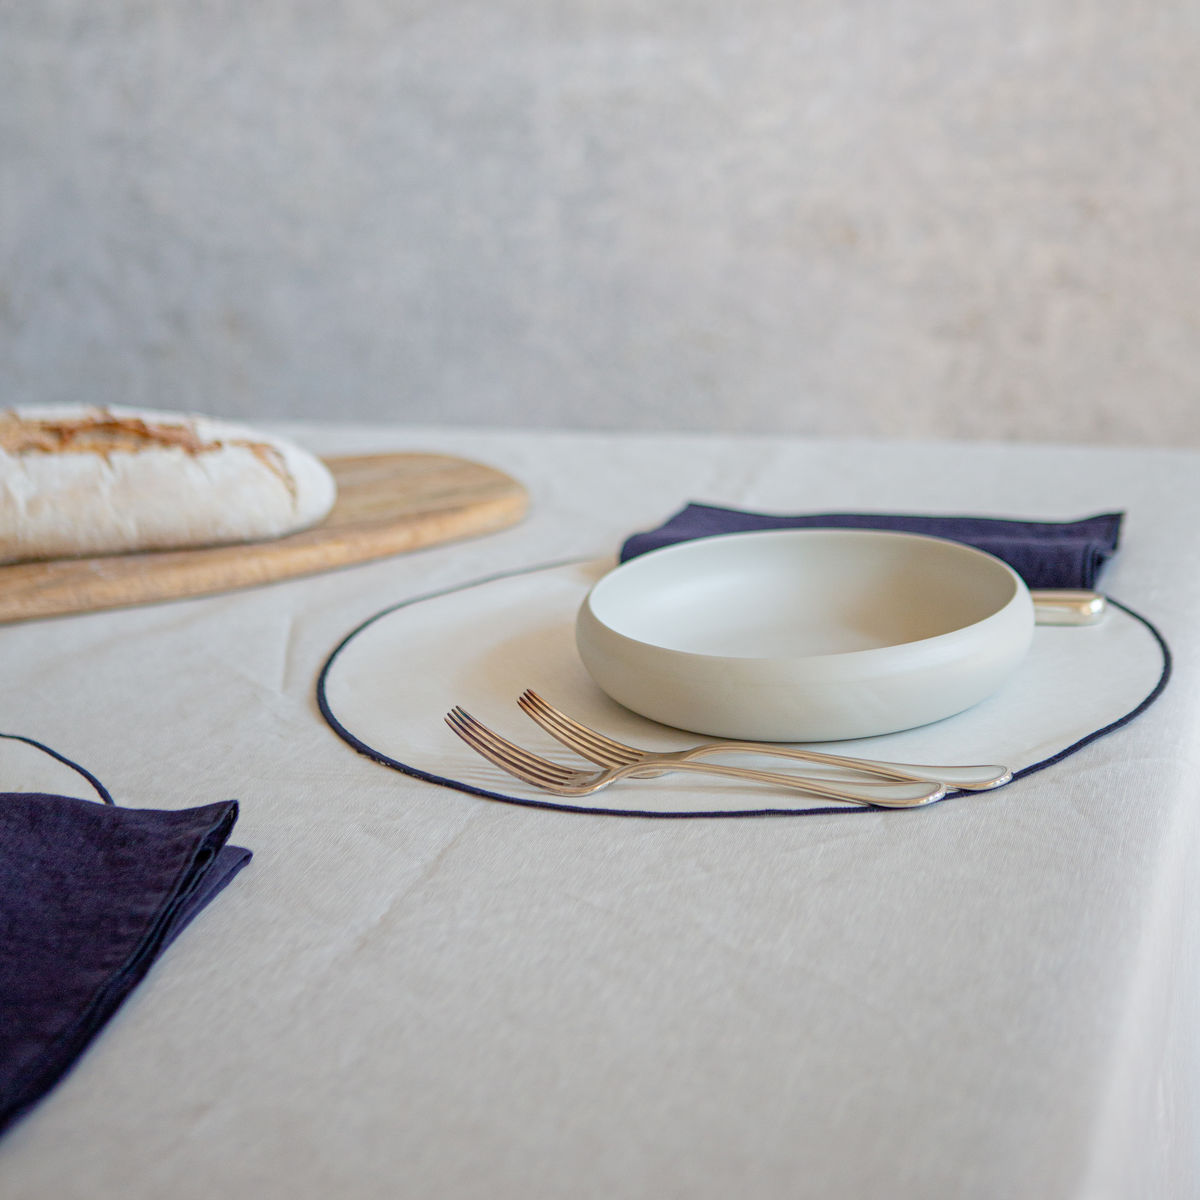 waxed round placemats, set of 2